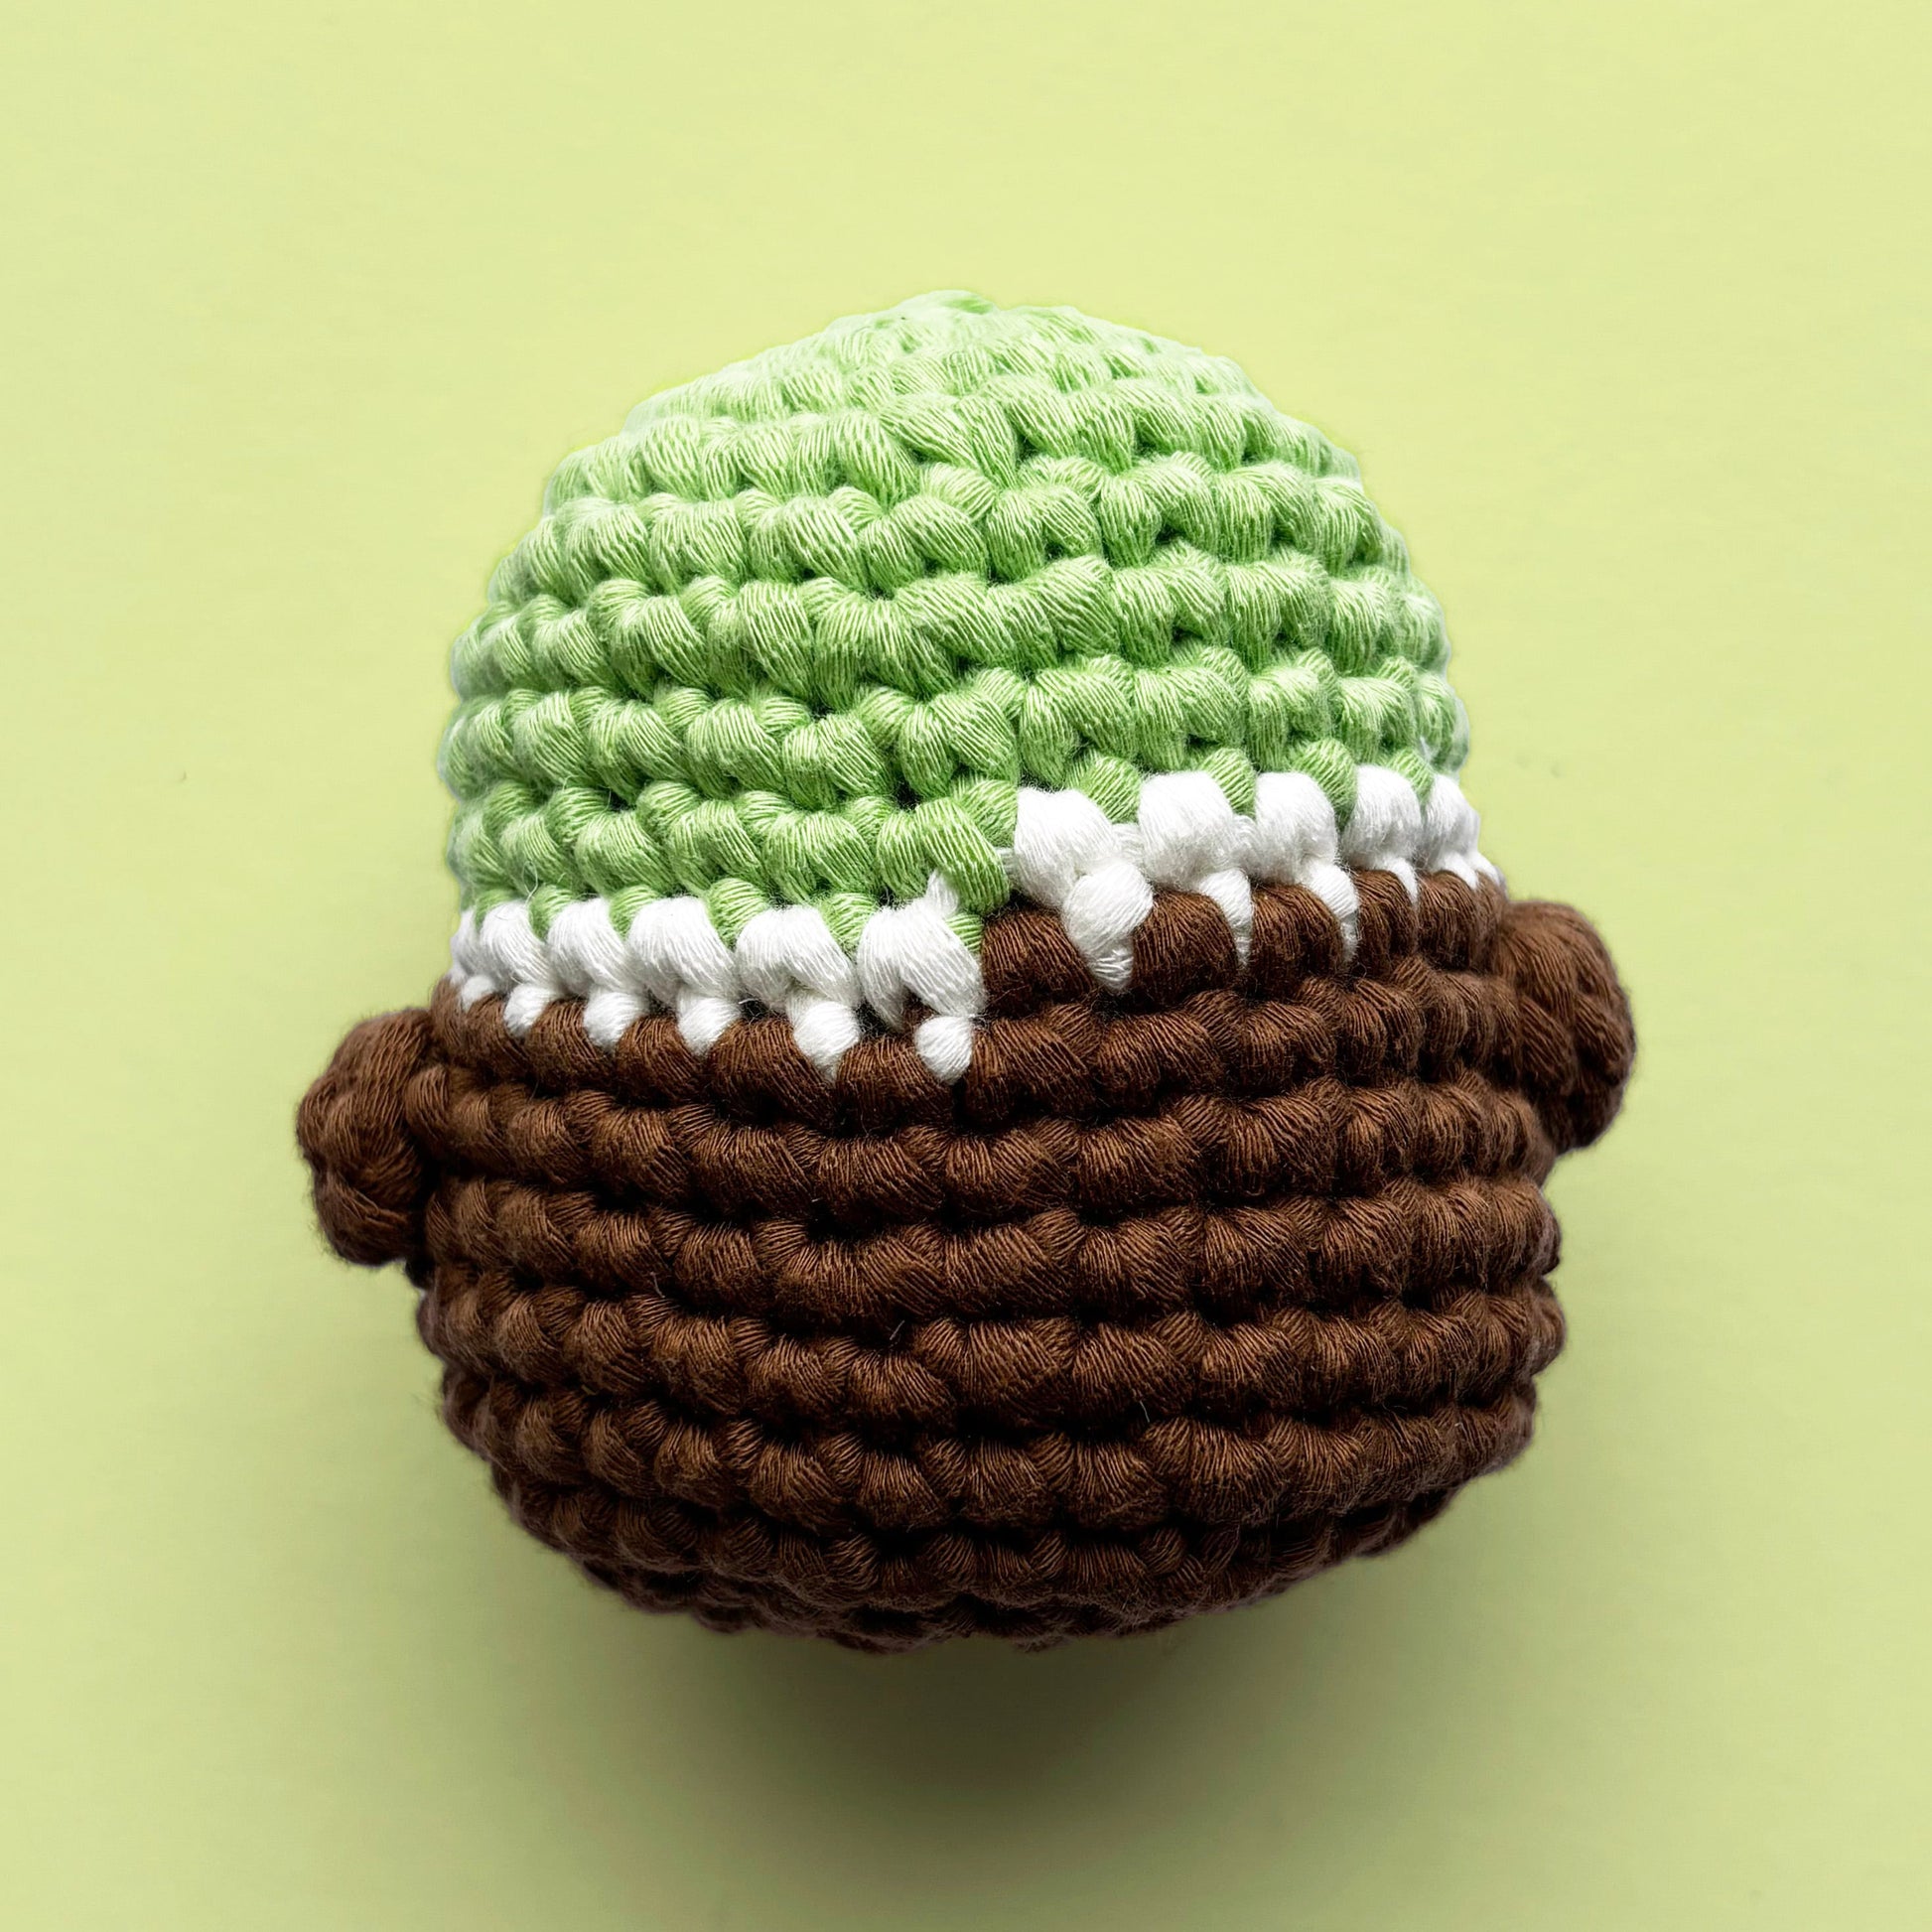 Louie the crochet duck, featuring vibrant green, white, and dark brown colors. Handcrafted from our beginner-friendly crochet kits, perfect for beginners and duck lovers. Back view.